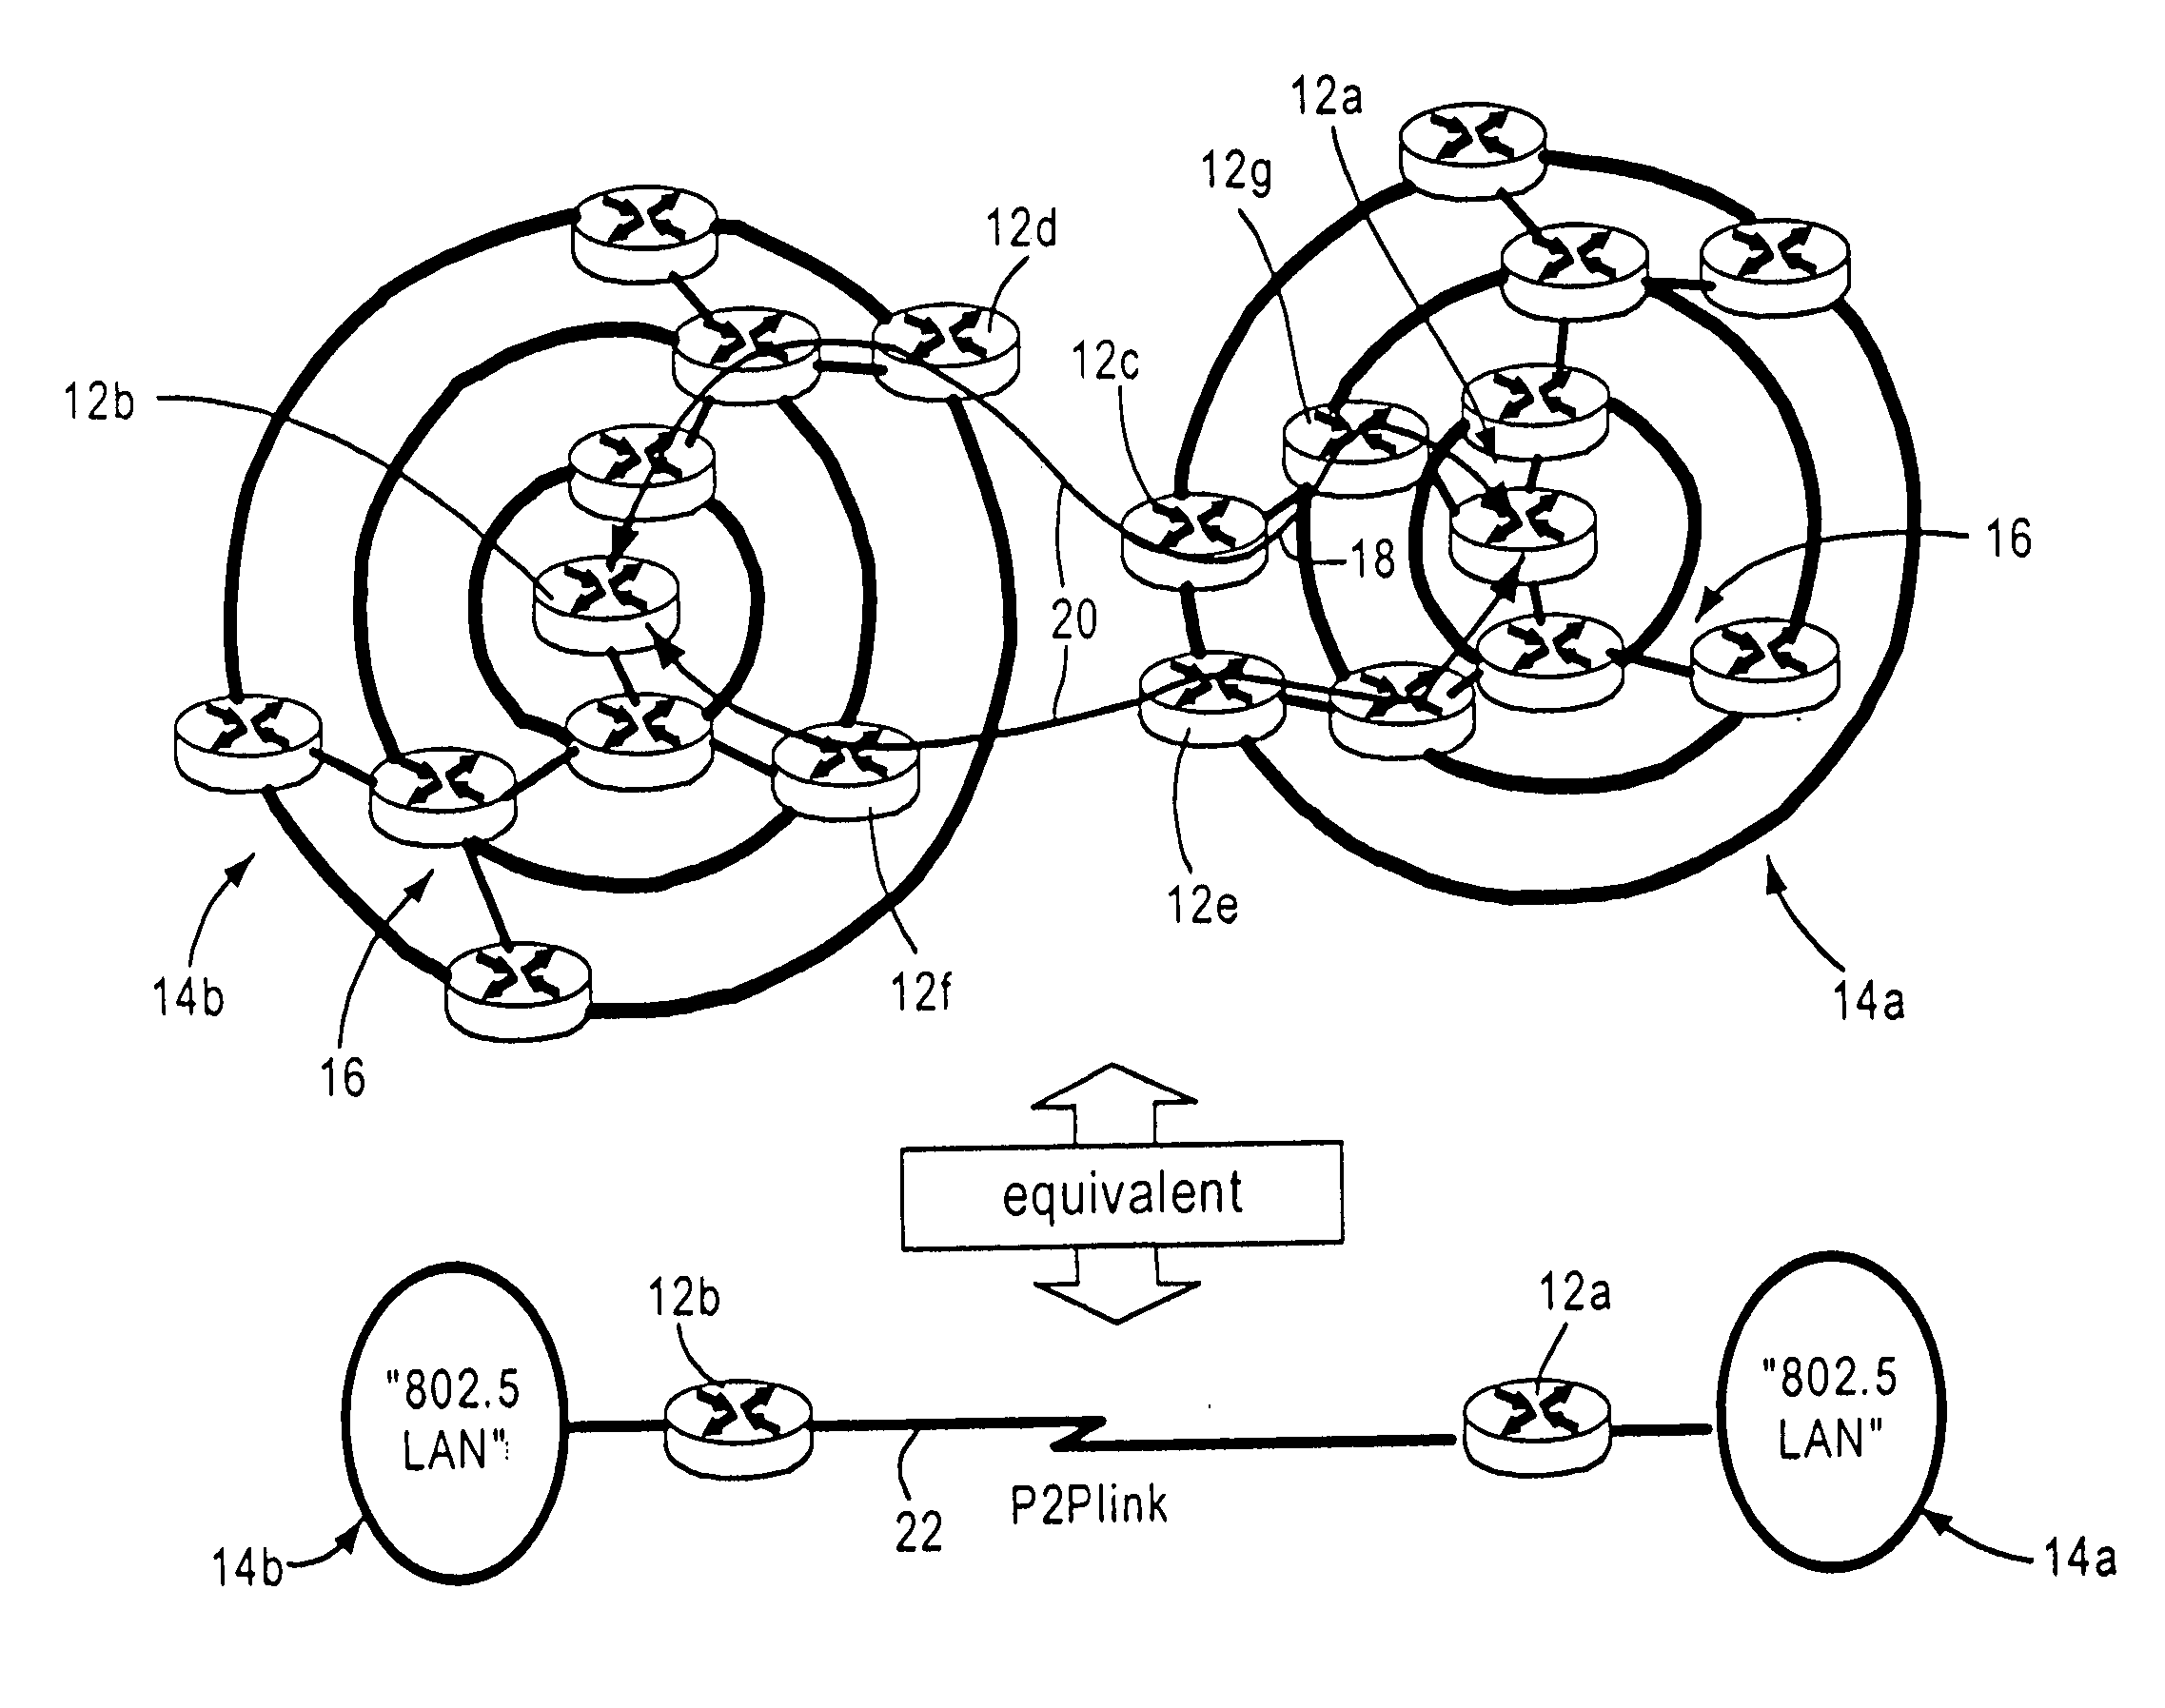 Arrangement for router attachments between roaming mobile routers in a clustered network